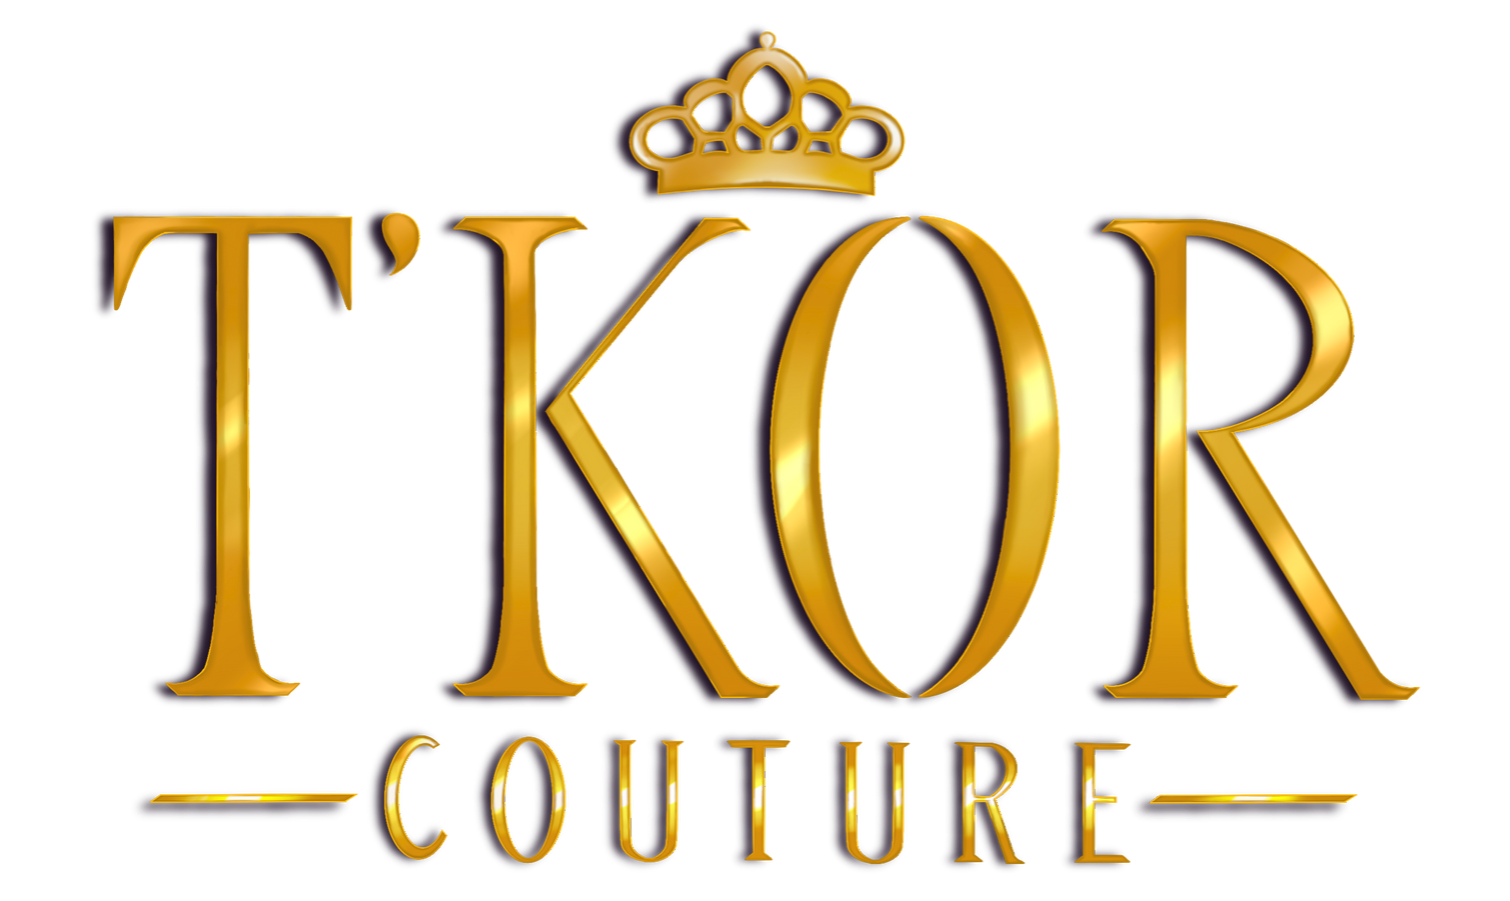 T'kor Couture